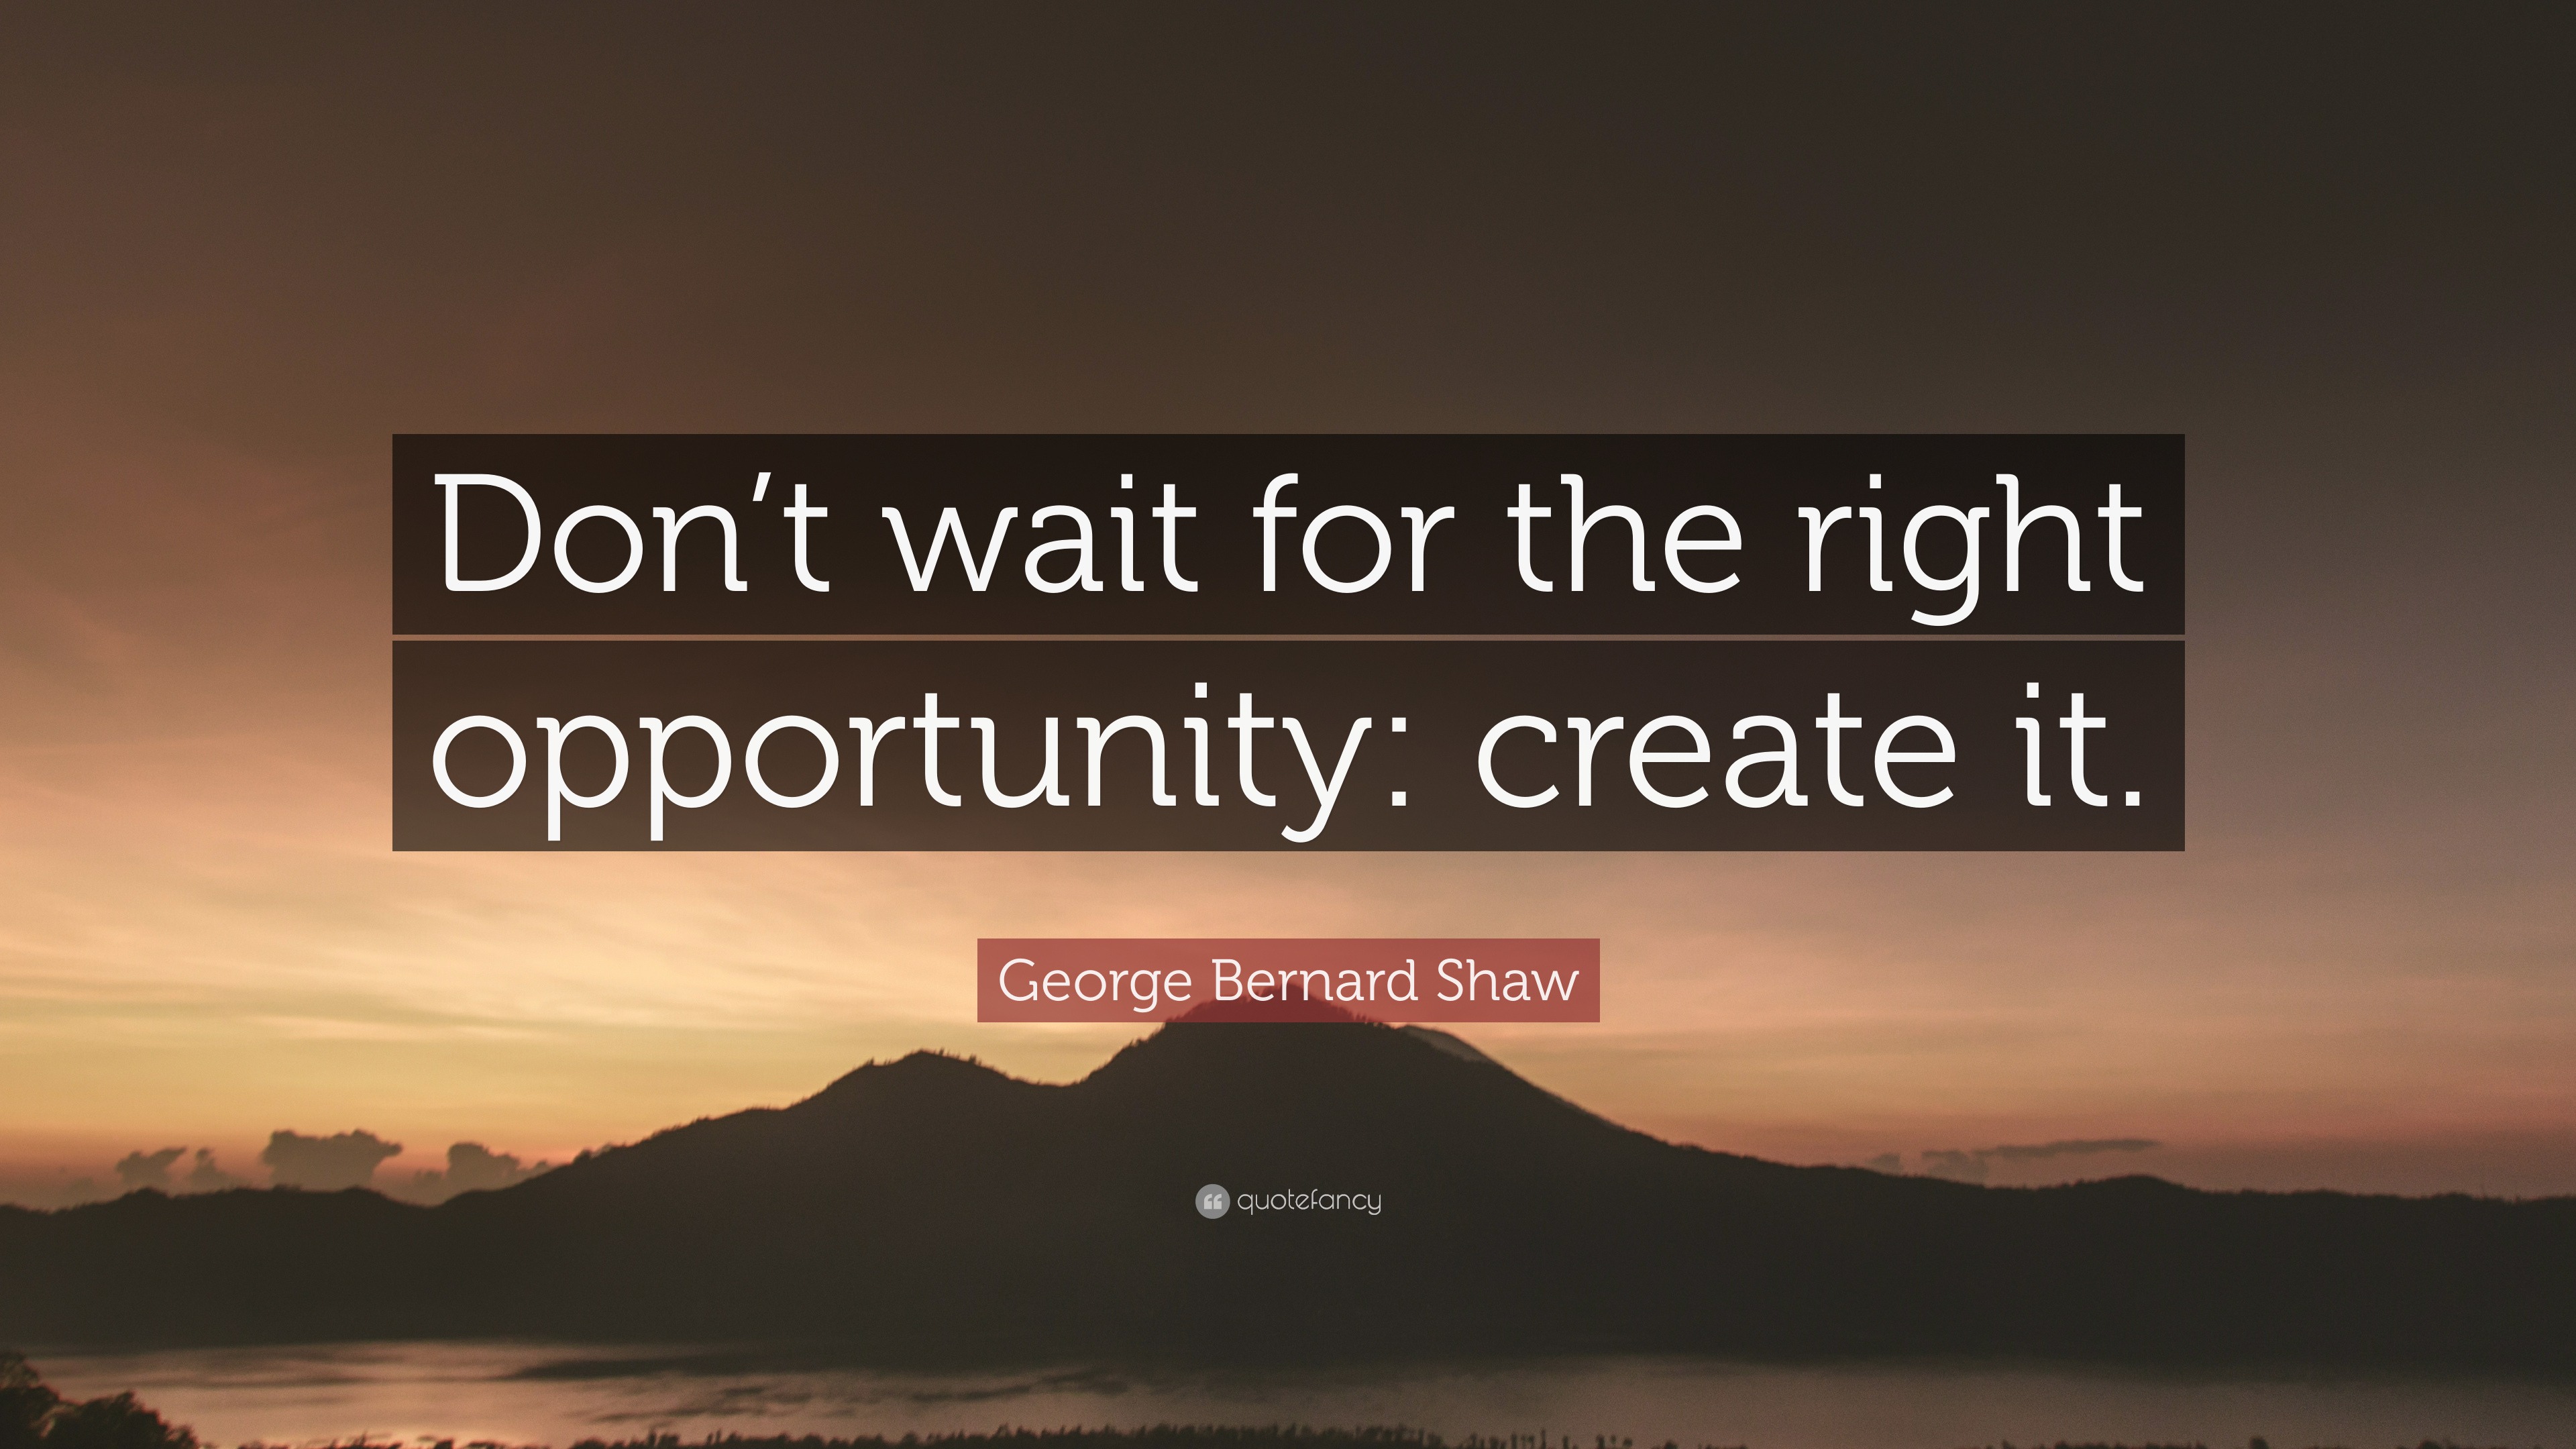 Bernard Shaw Quote “Don’t wait for the right